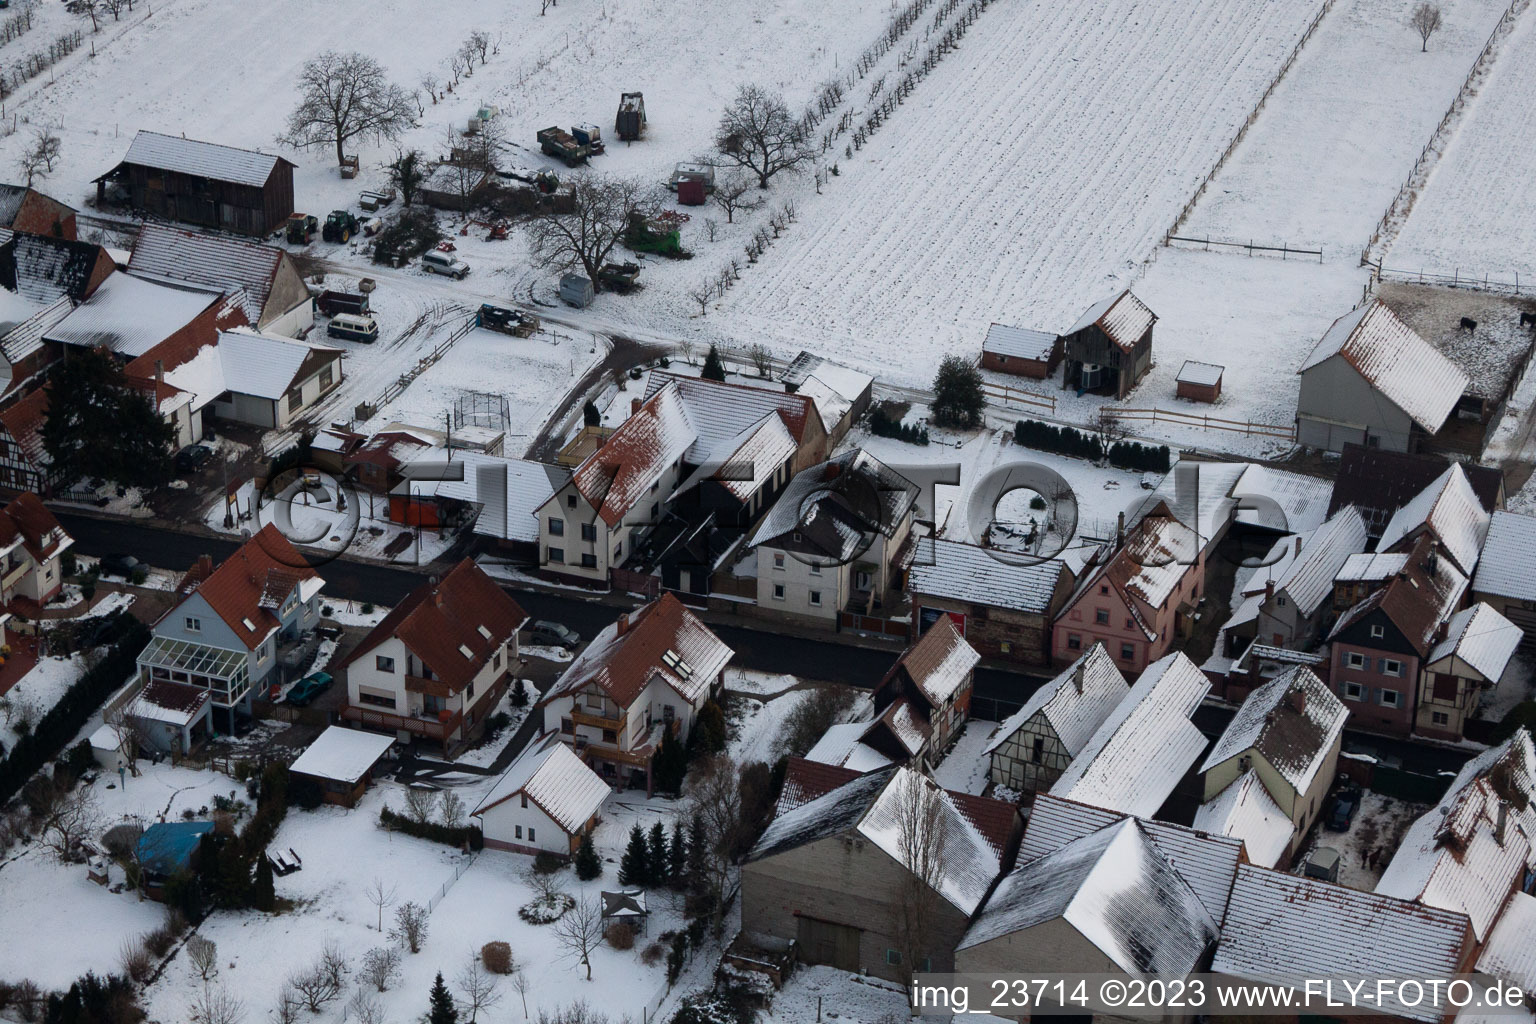 Hergersweiler in the state Rhineland-Palatinate, Germany from above